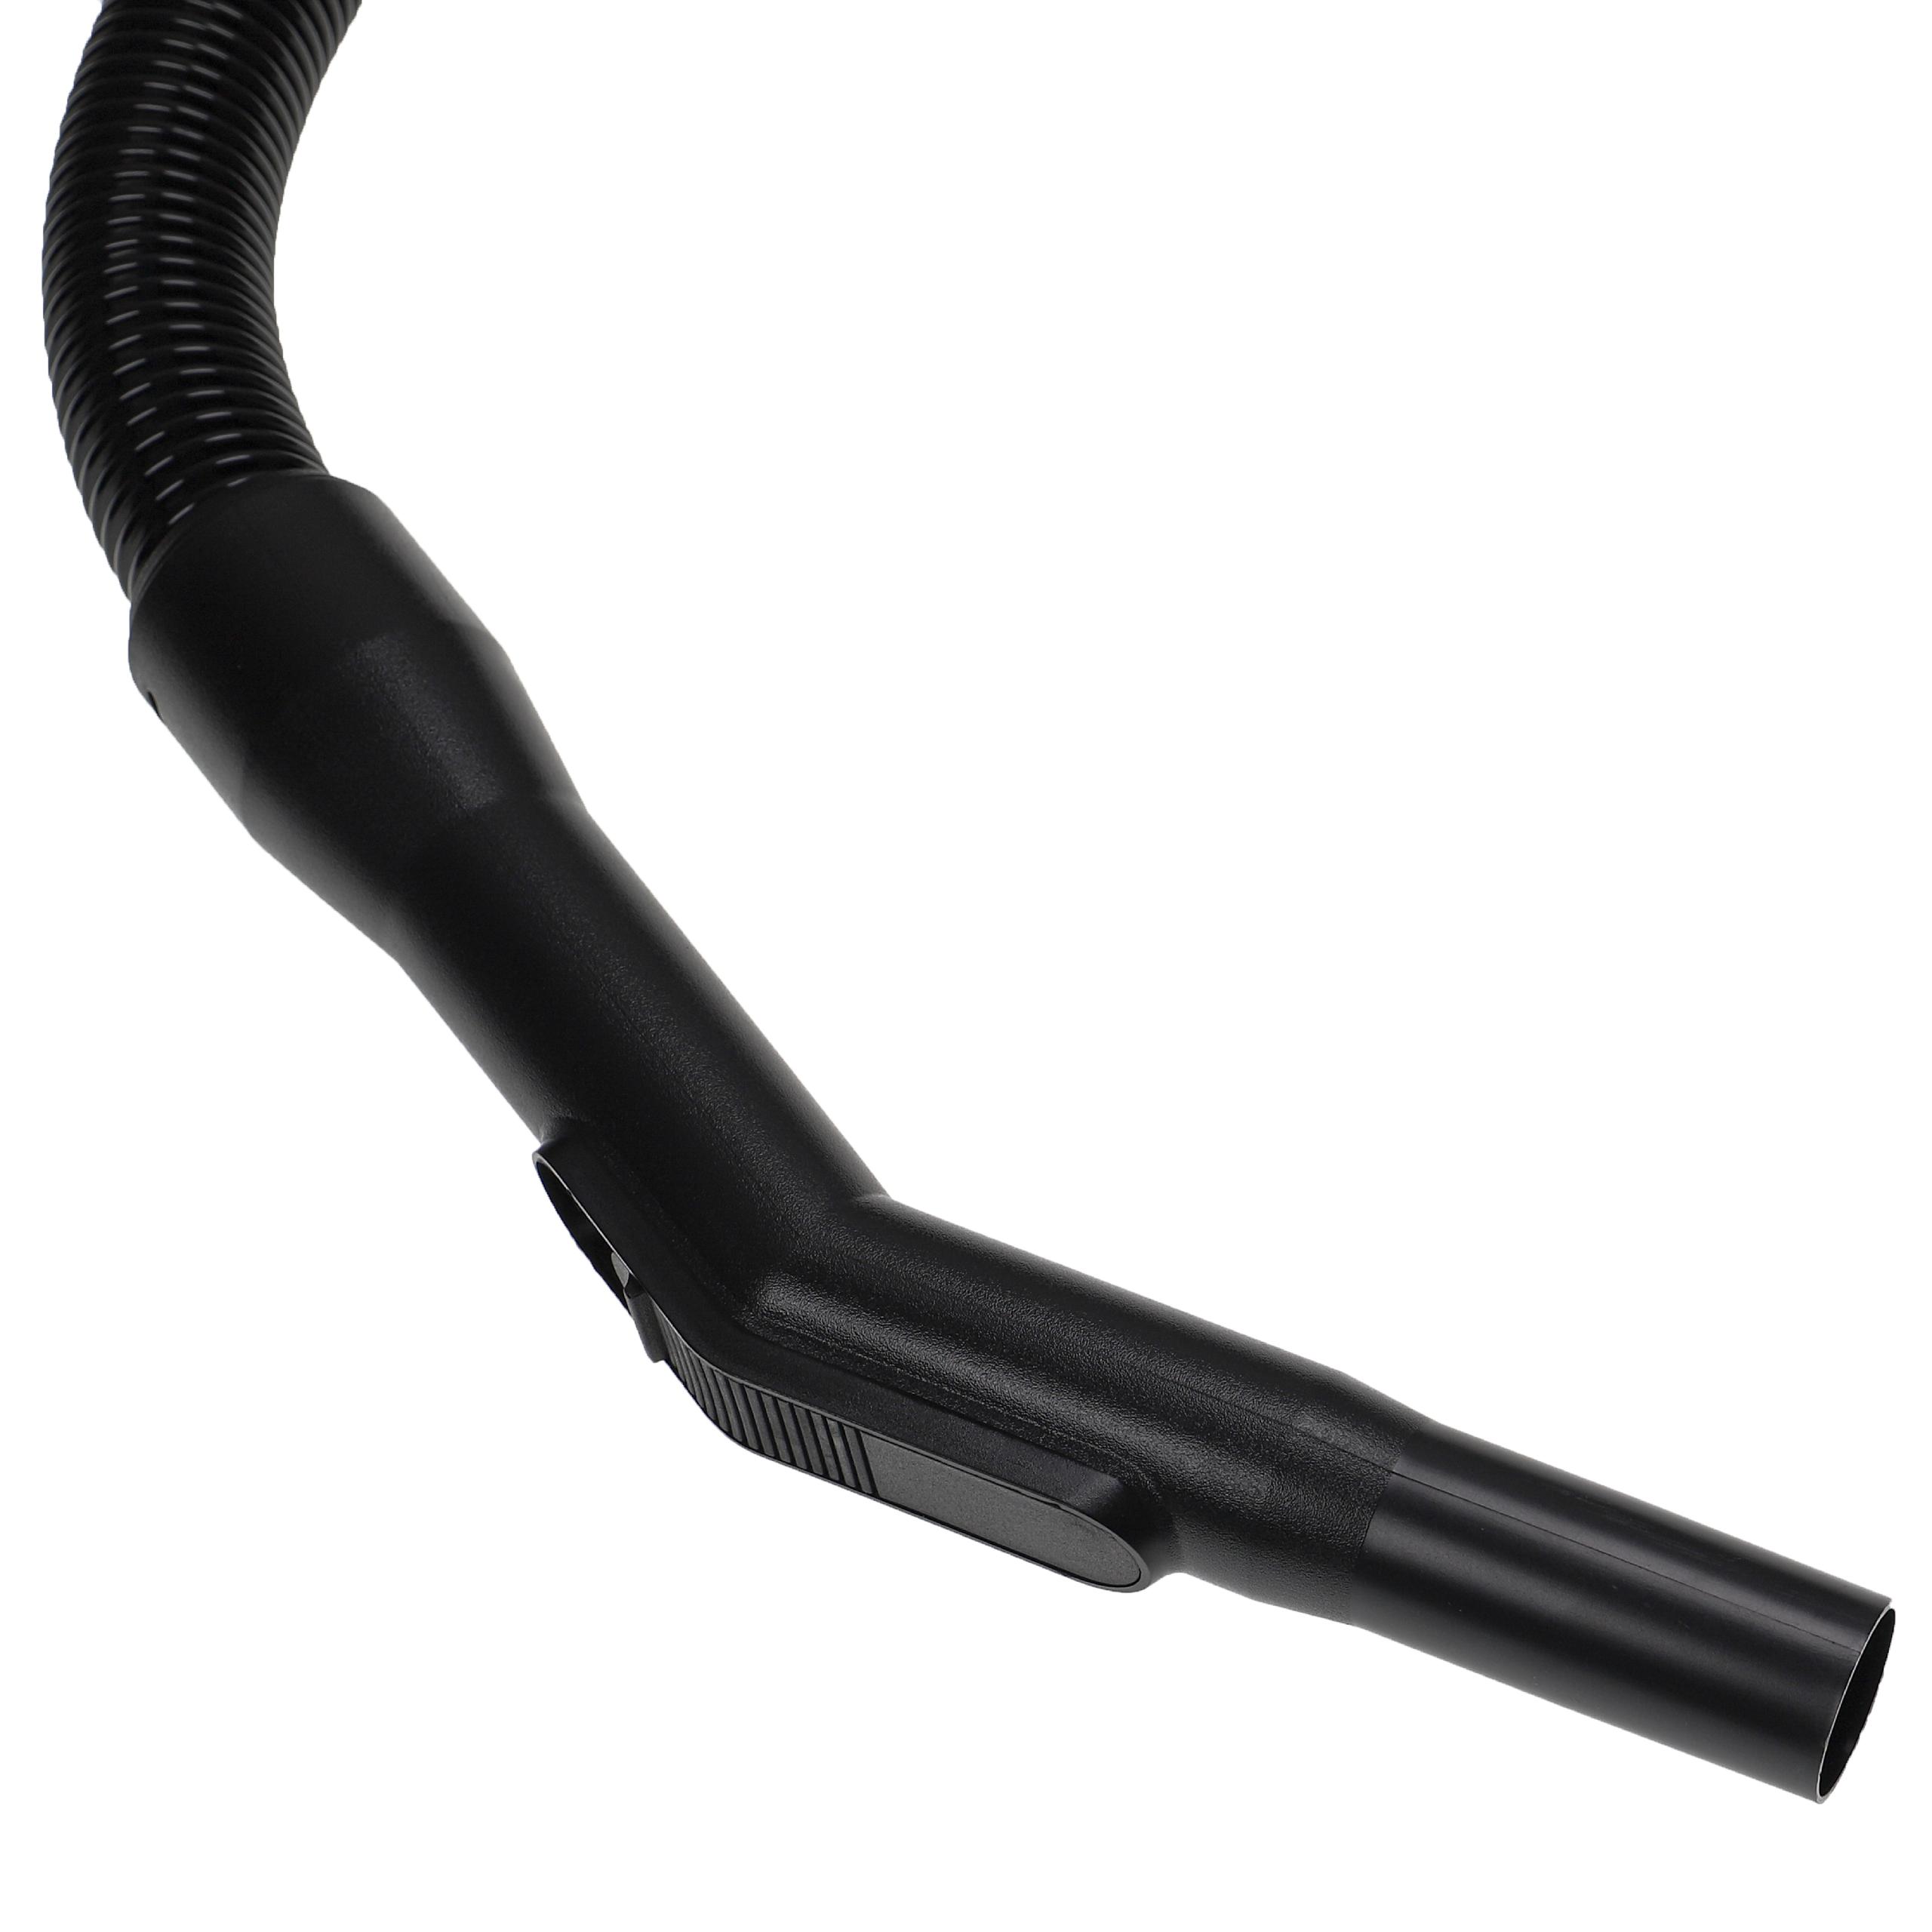 Hose as Replacement for Nilfisk 12018001 - with Handle, 1.8 m long